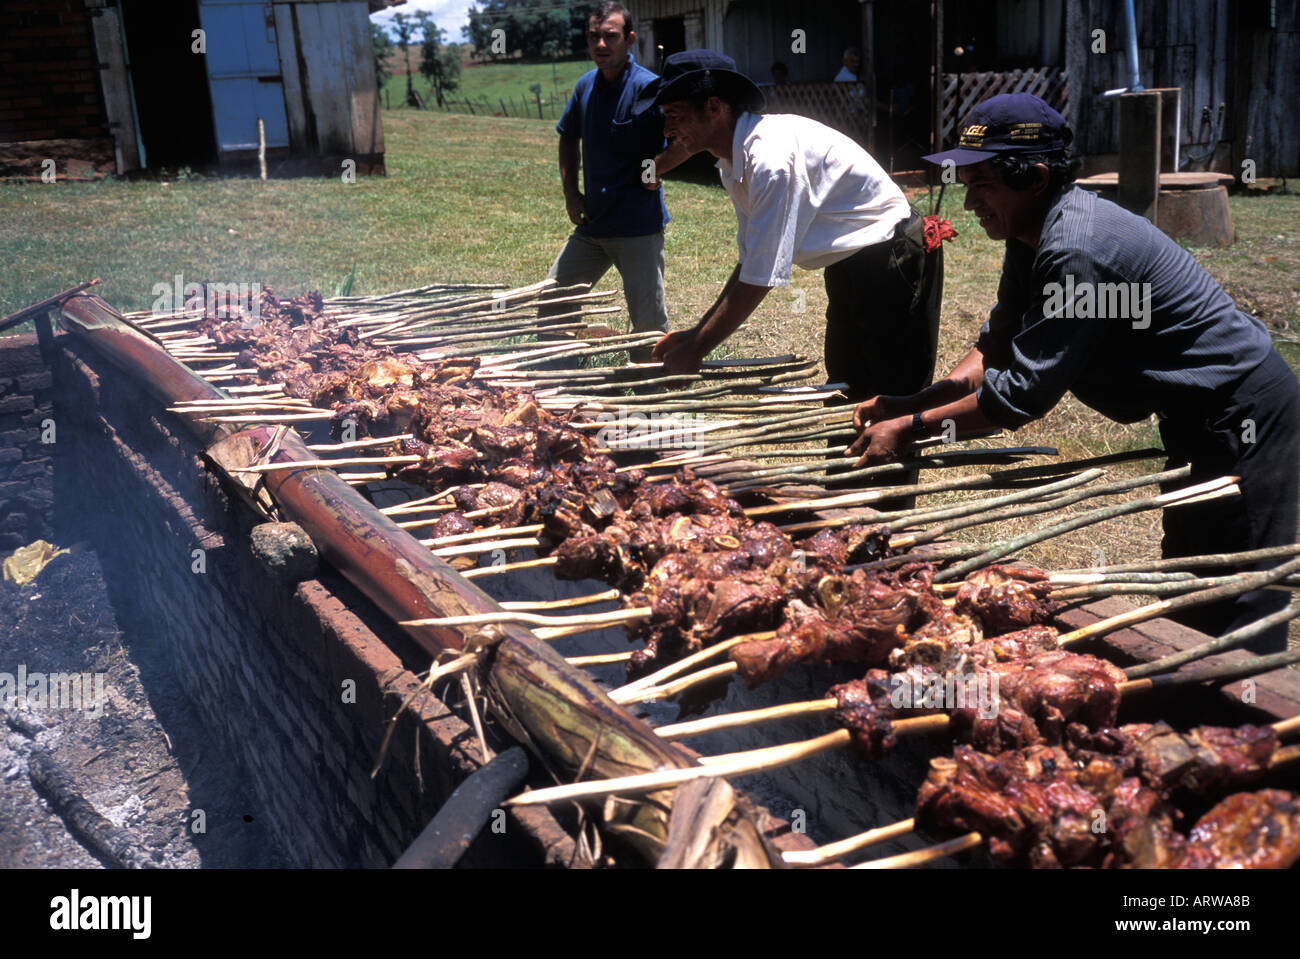 paraguayan-men-preparing-meat-on-skewers-over-a-parrilla-a-barbeque-ARWA8B.jpg